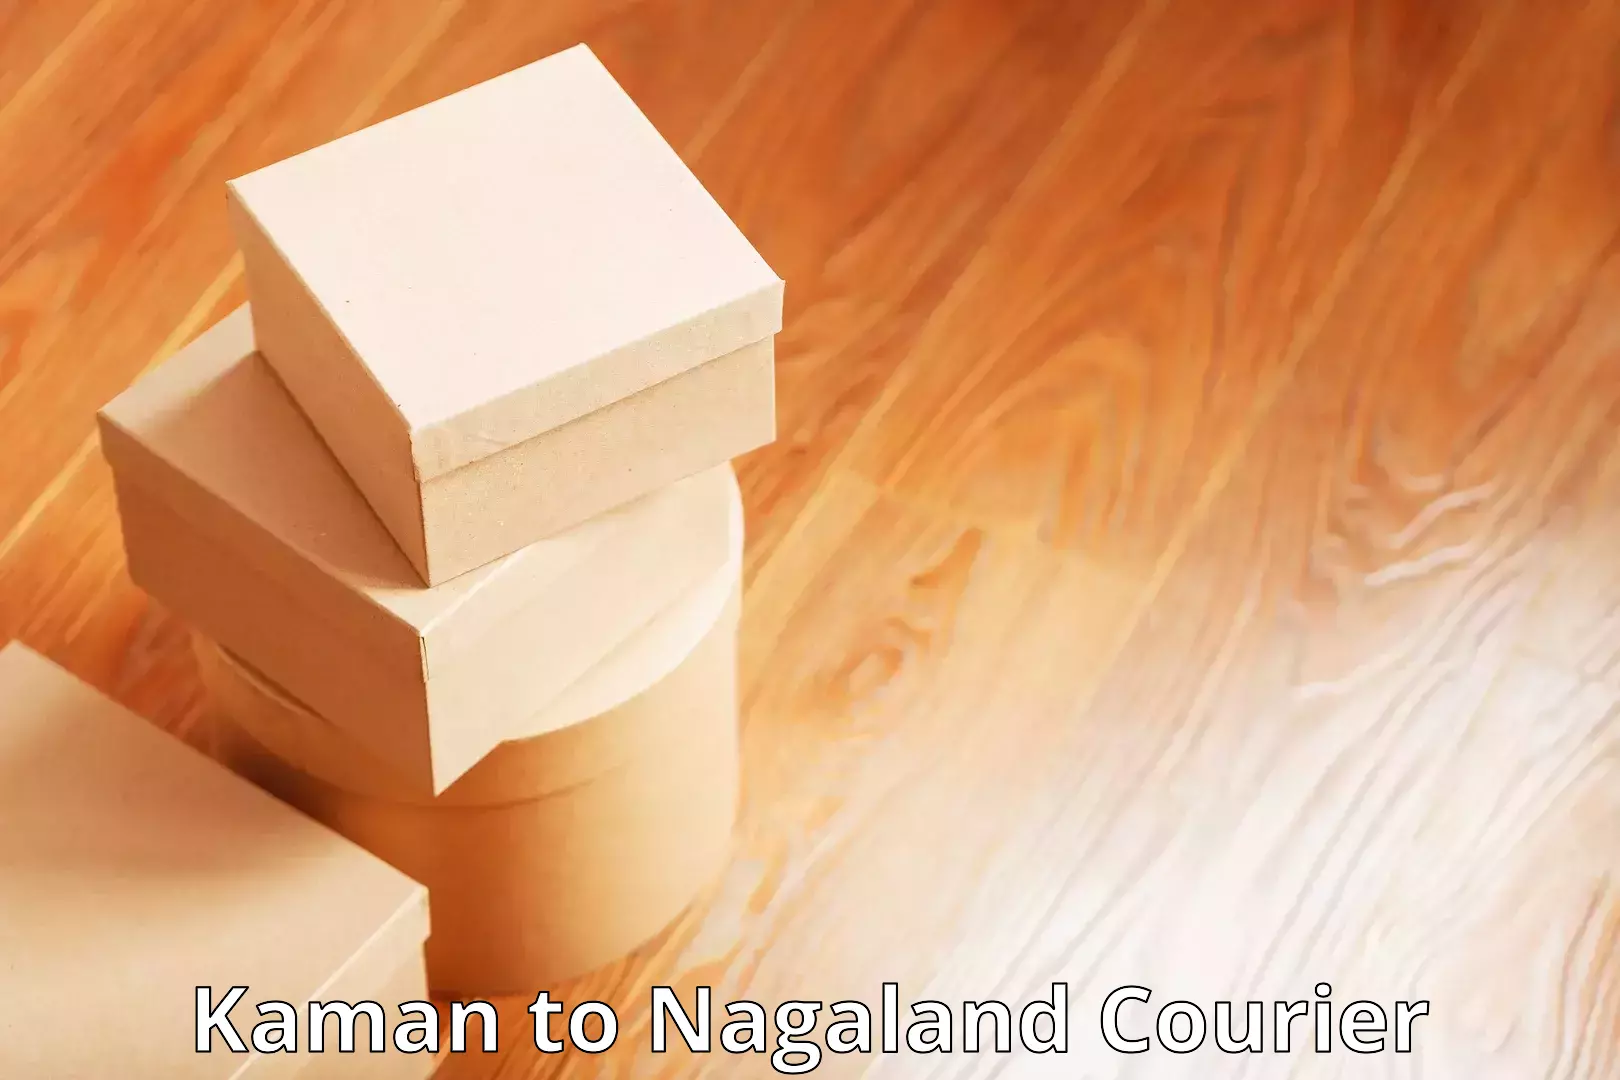 High-priority parcel service Kaman to Nagaland